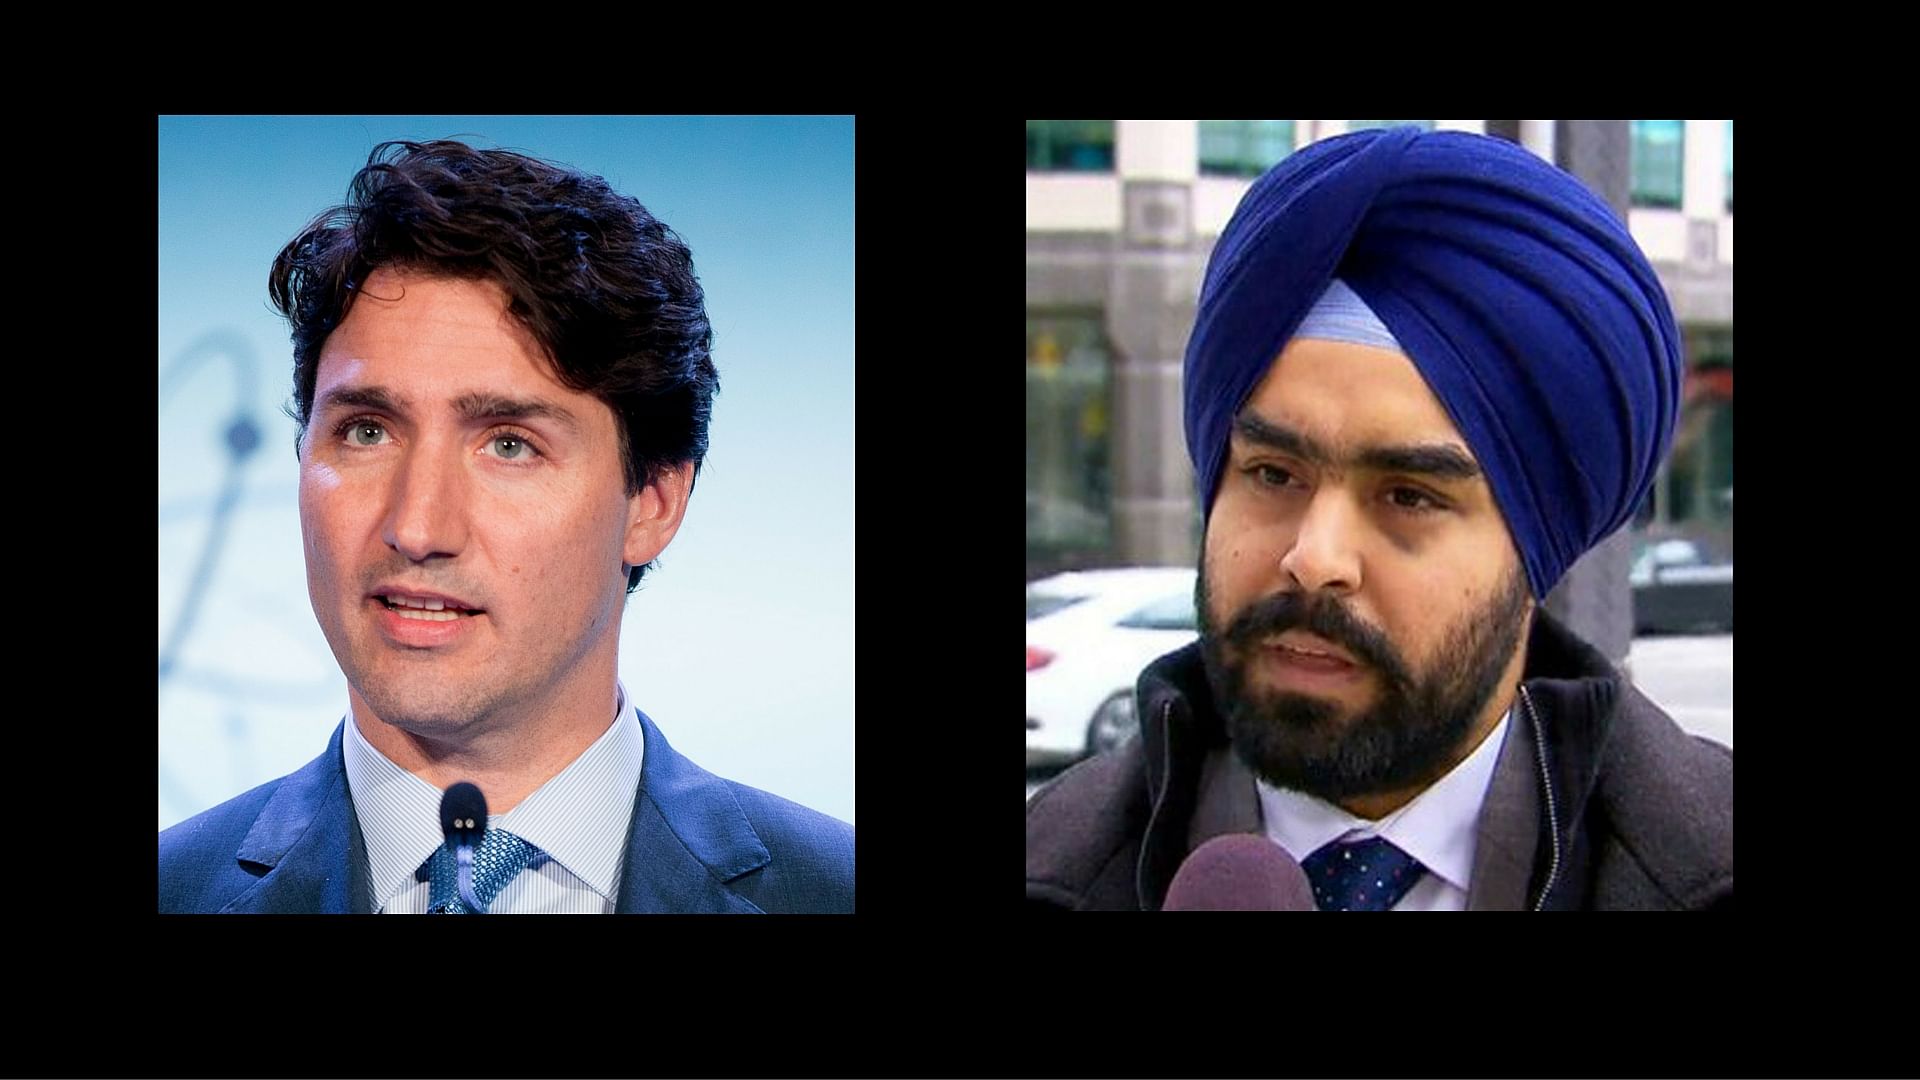 The victim of hate crime Supninder Singh (left) and PM Justin Trudeau. (Photo Courtesy: <a href="https://twitter.com/SikhProf">Twitter</a>/AP)